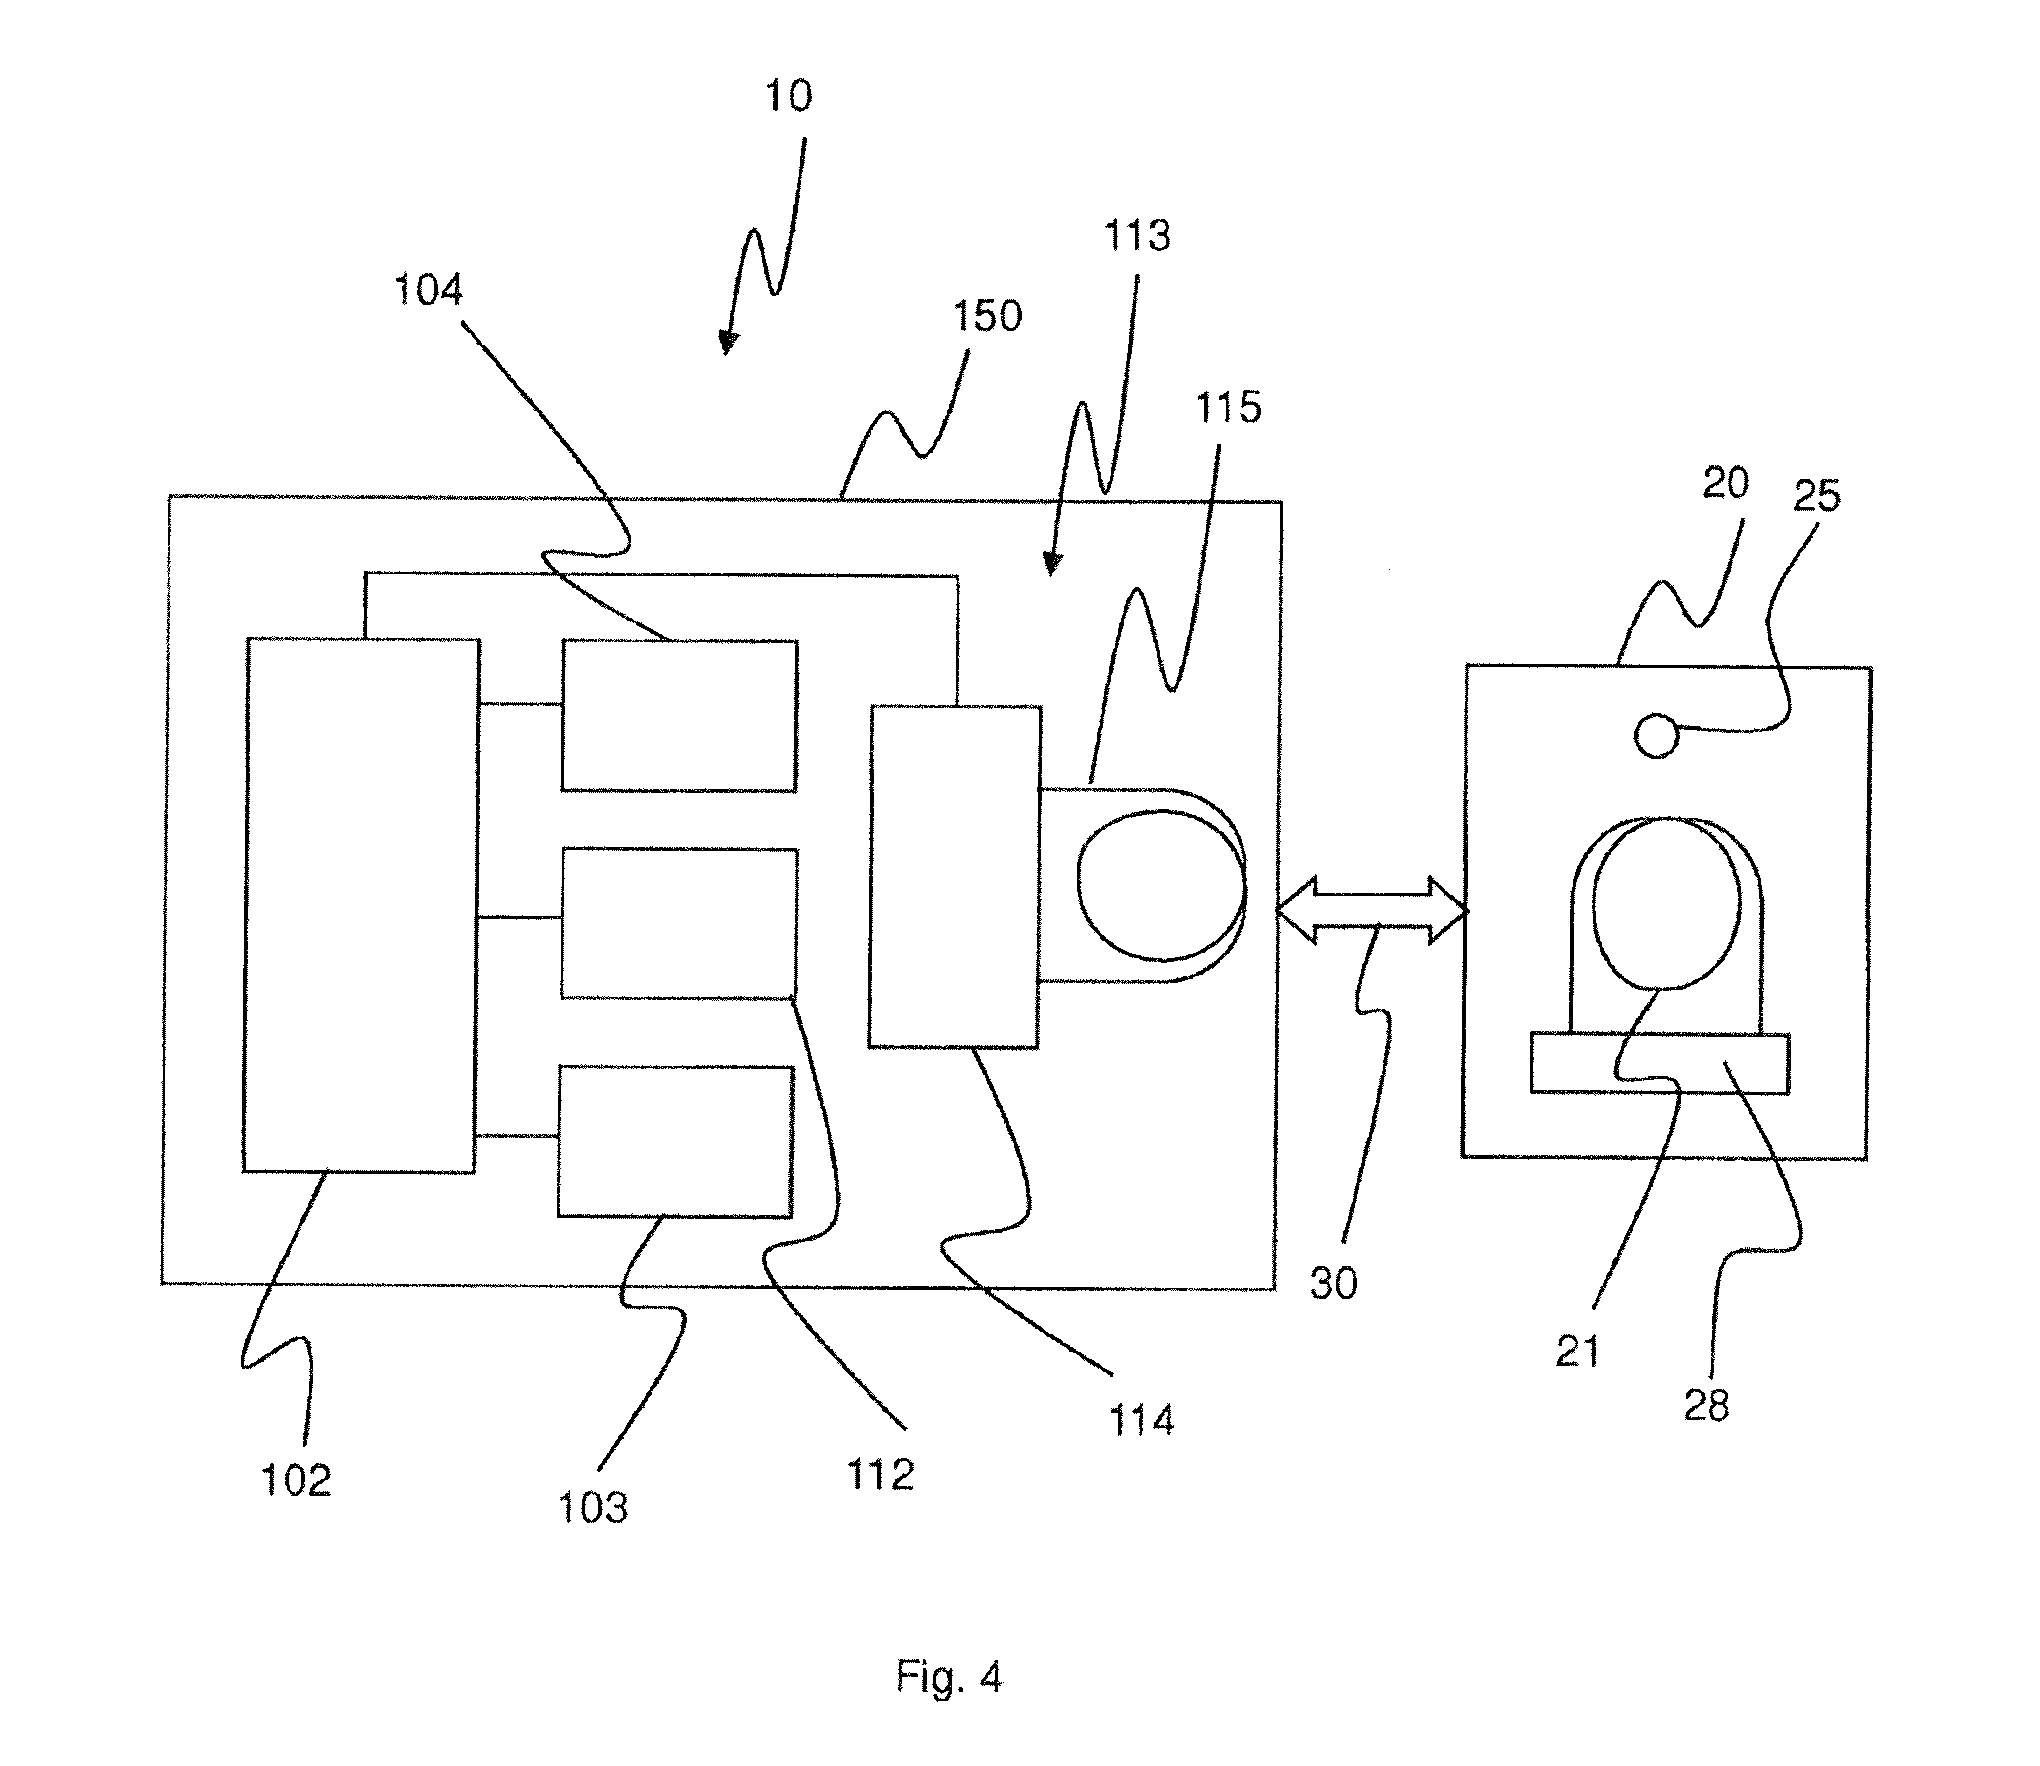 Long-range optical instrument and peripheral device and method for providing communication between the long-range optical instrument and the peripheral device